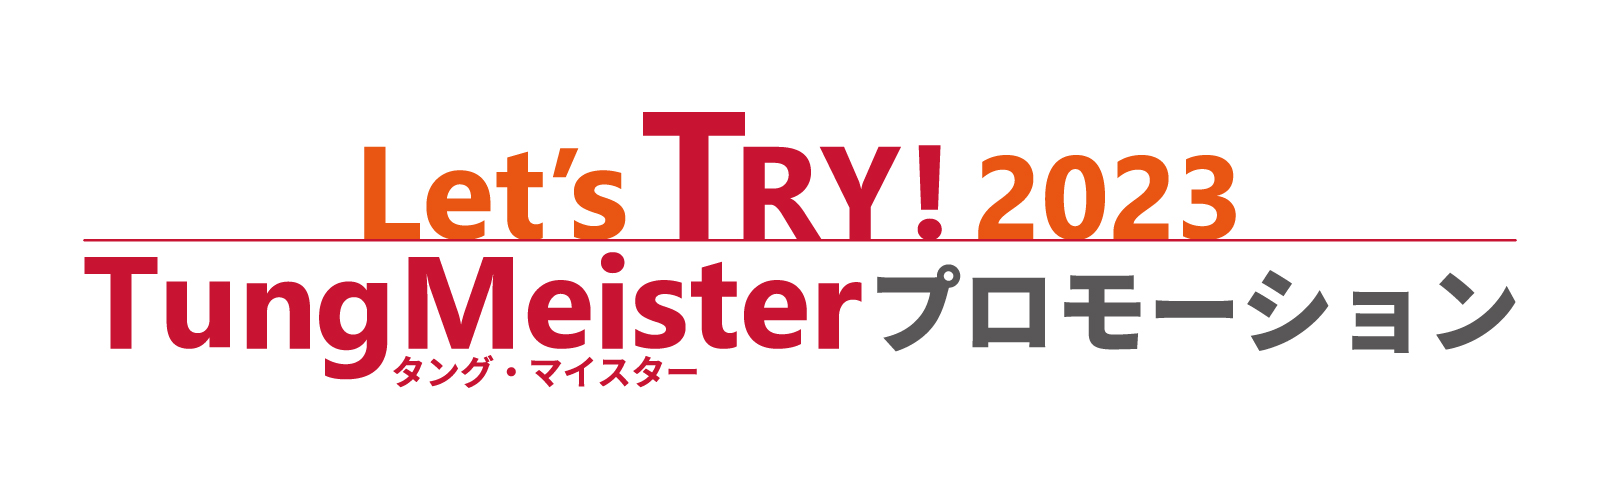 Let's TRY! 2023 TungMeisterプロモーション_スクエア - 株式会社